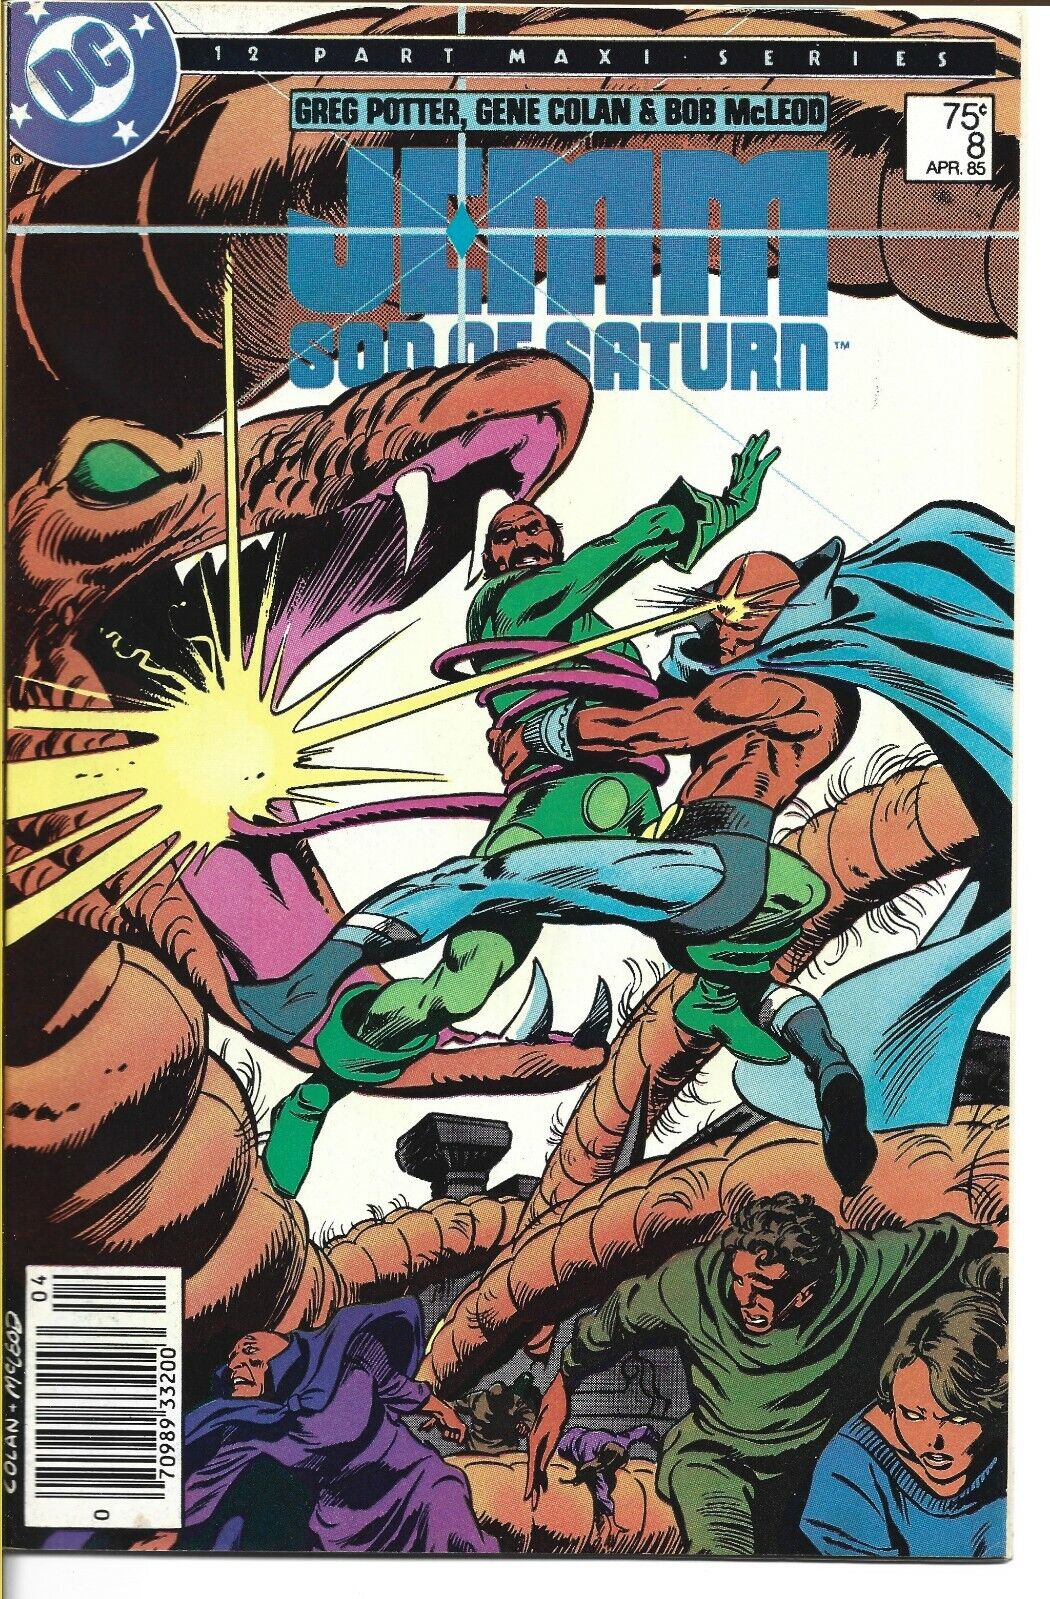 JEMM SON OF SATURN #8 DC COMICS 1985 BAGGED AND BOARDED